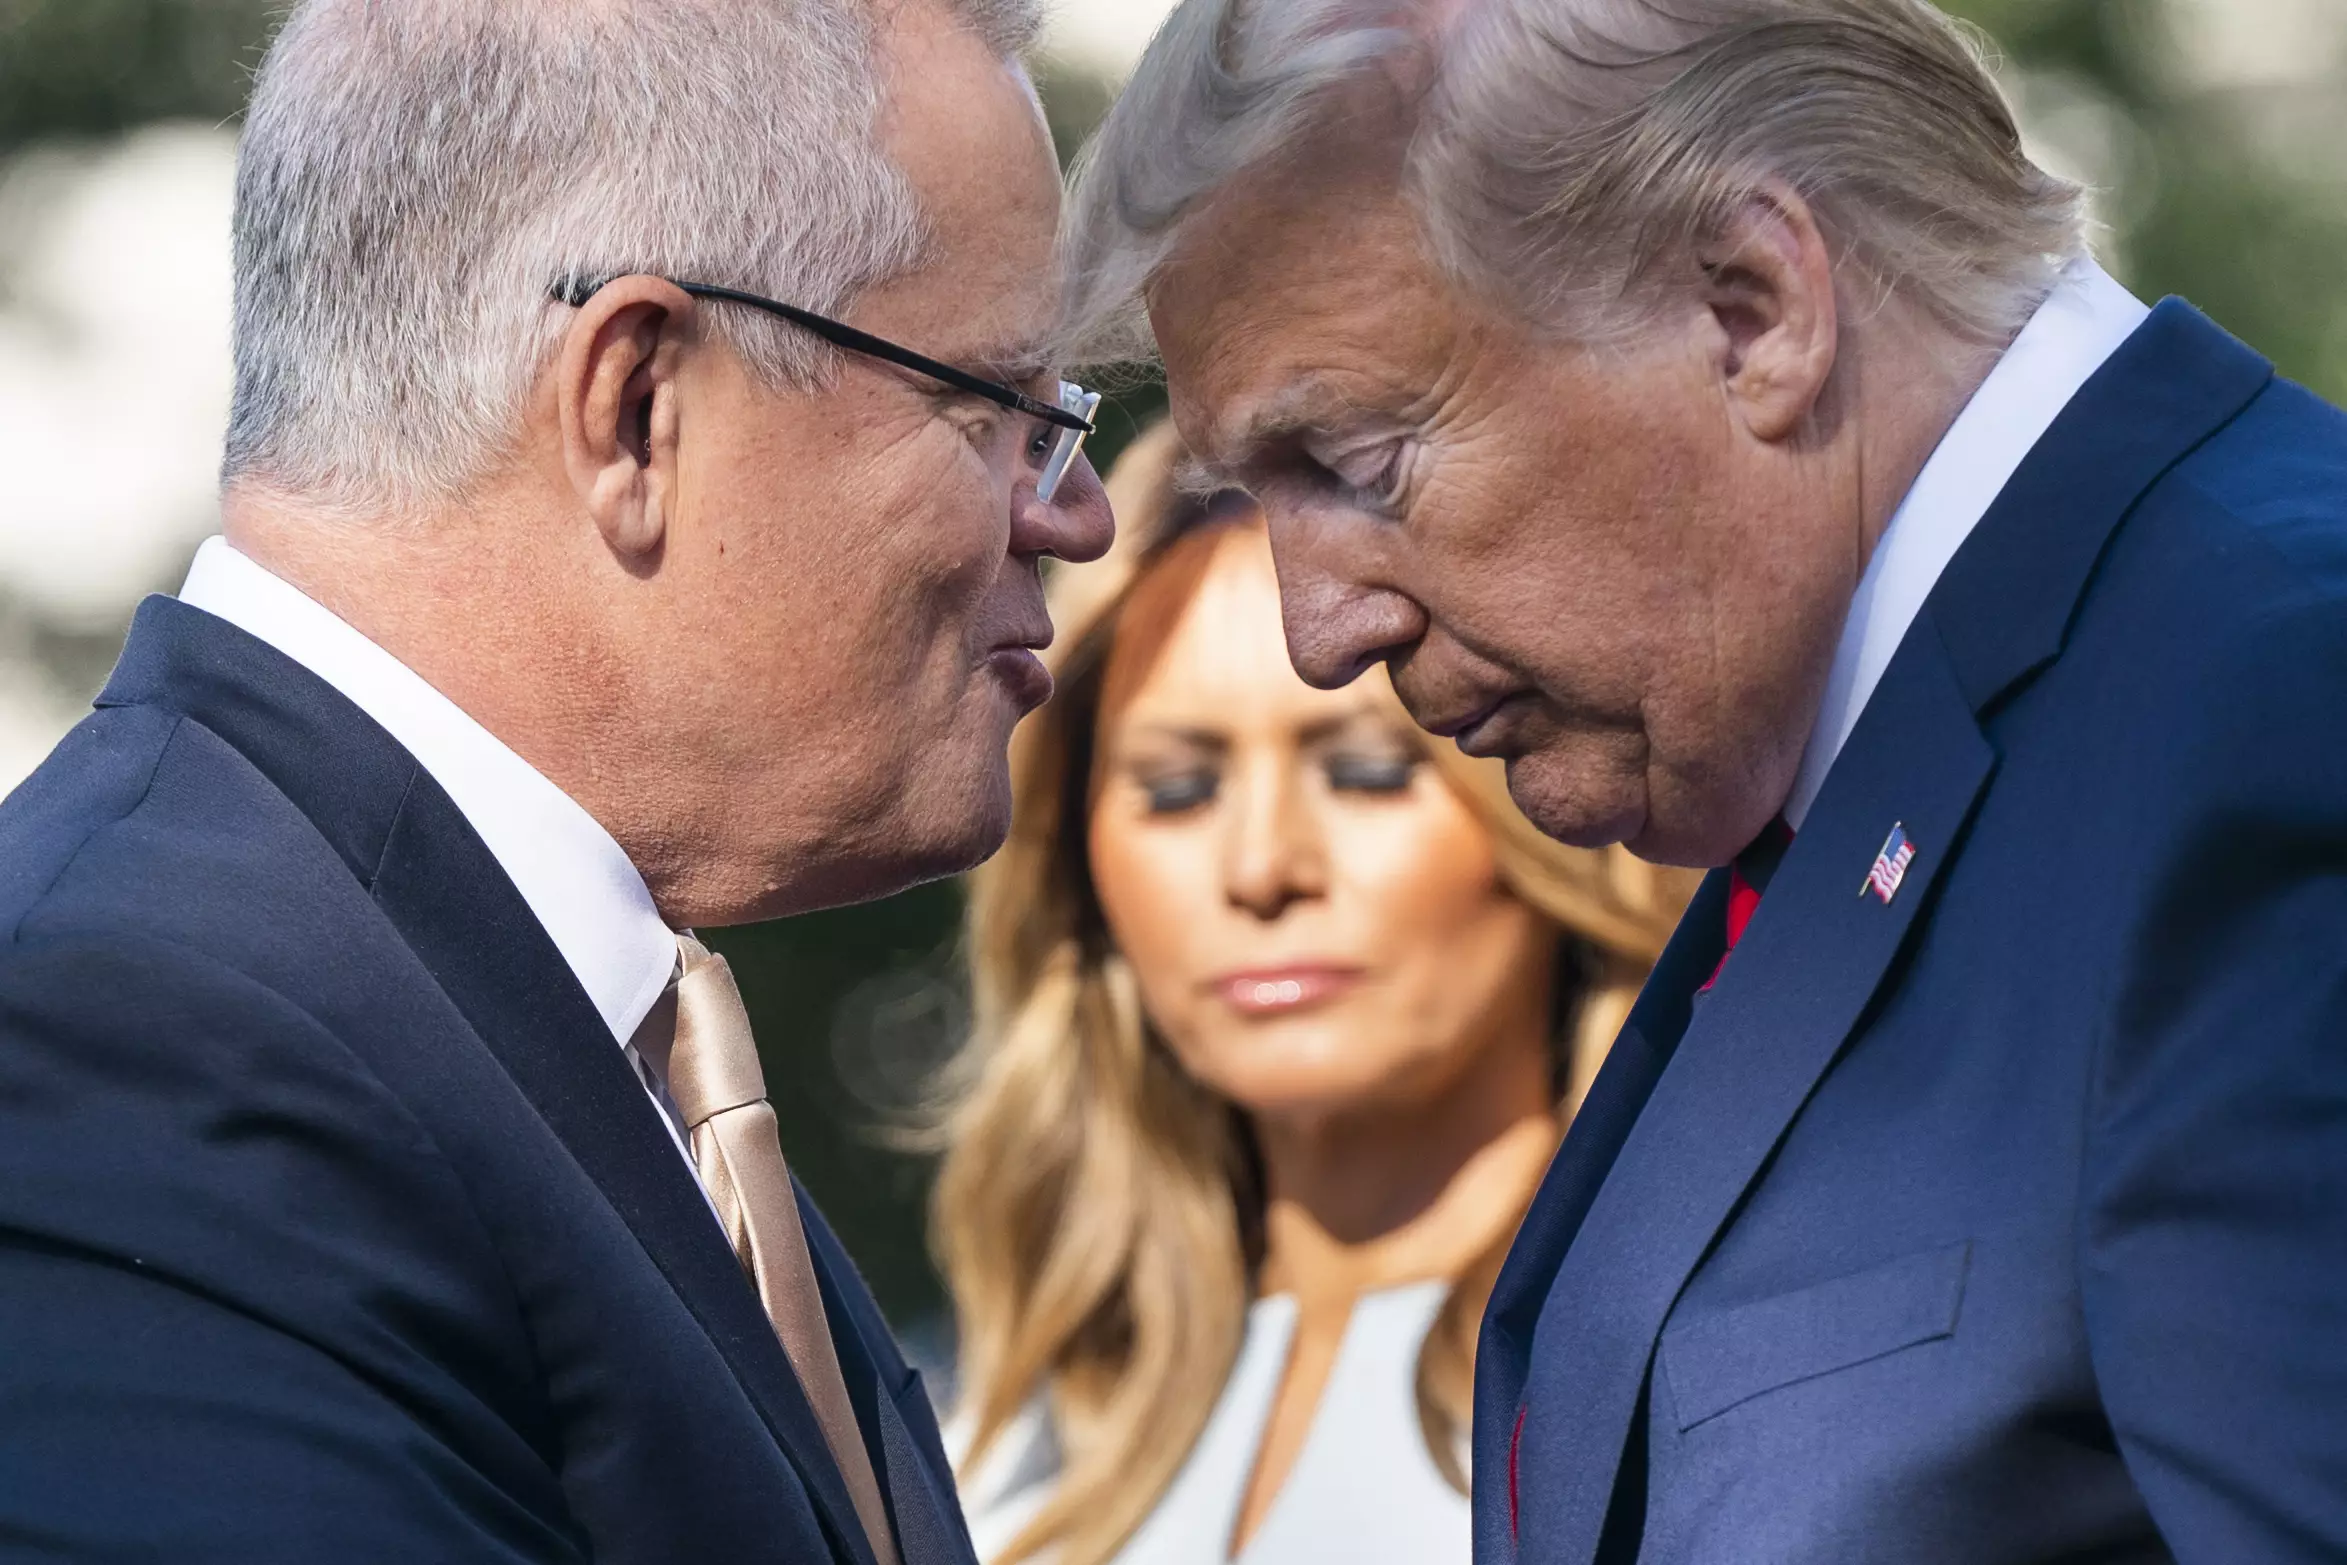 Trump welcomes Morrison to the White House.